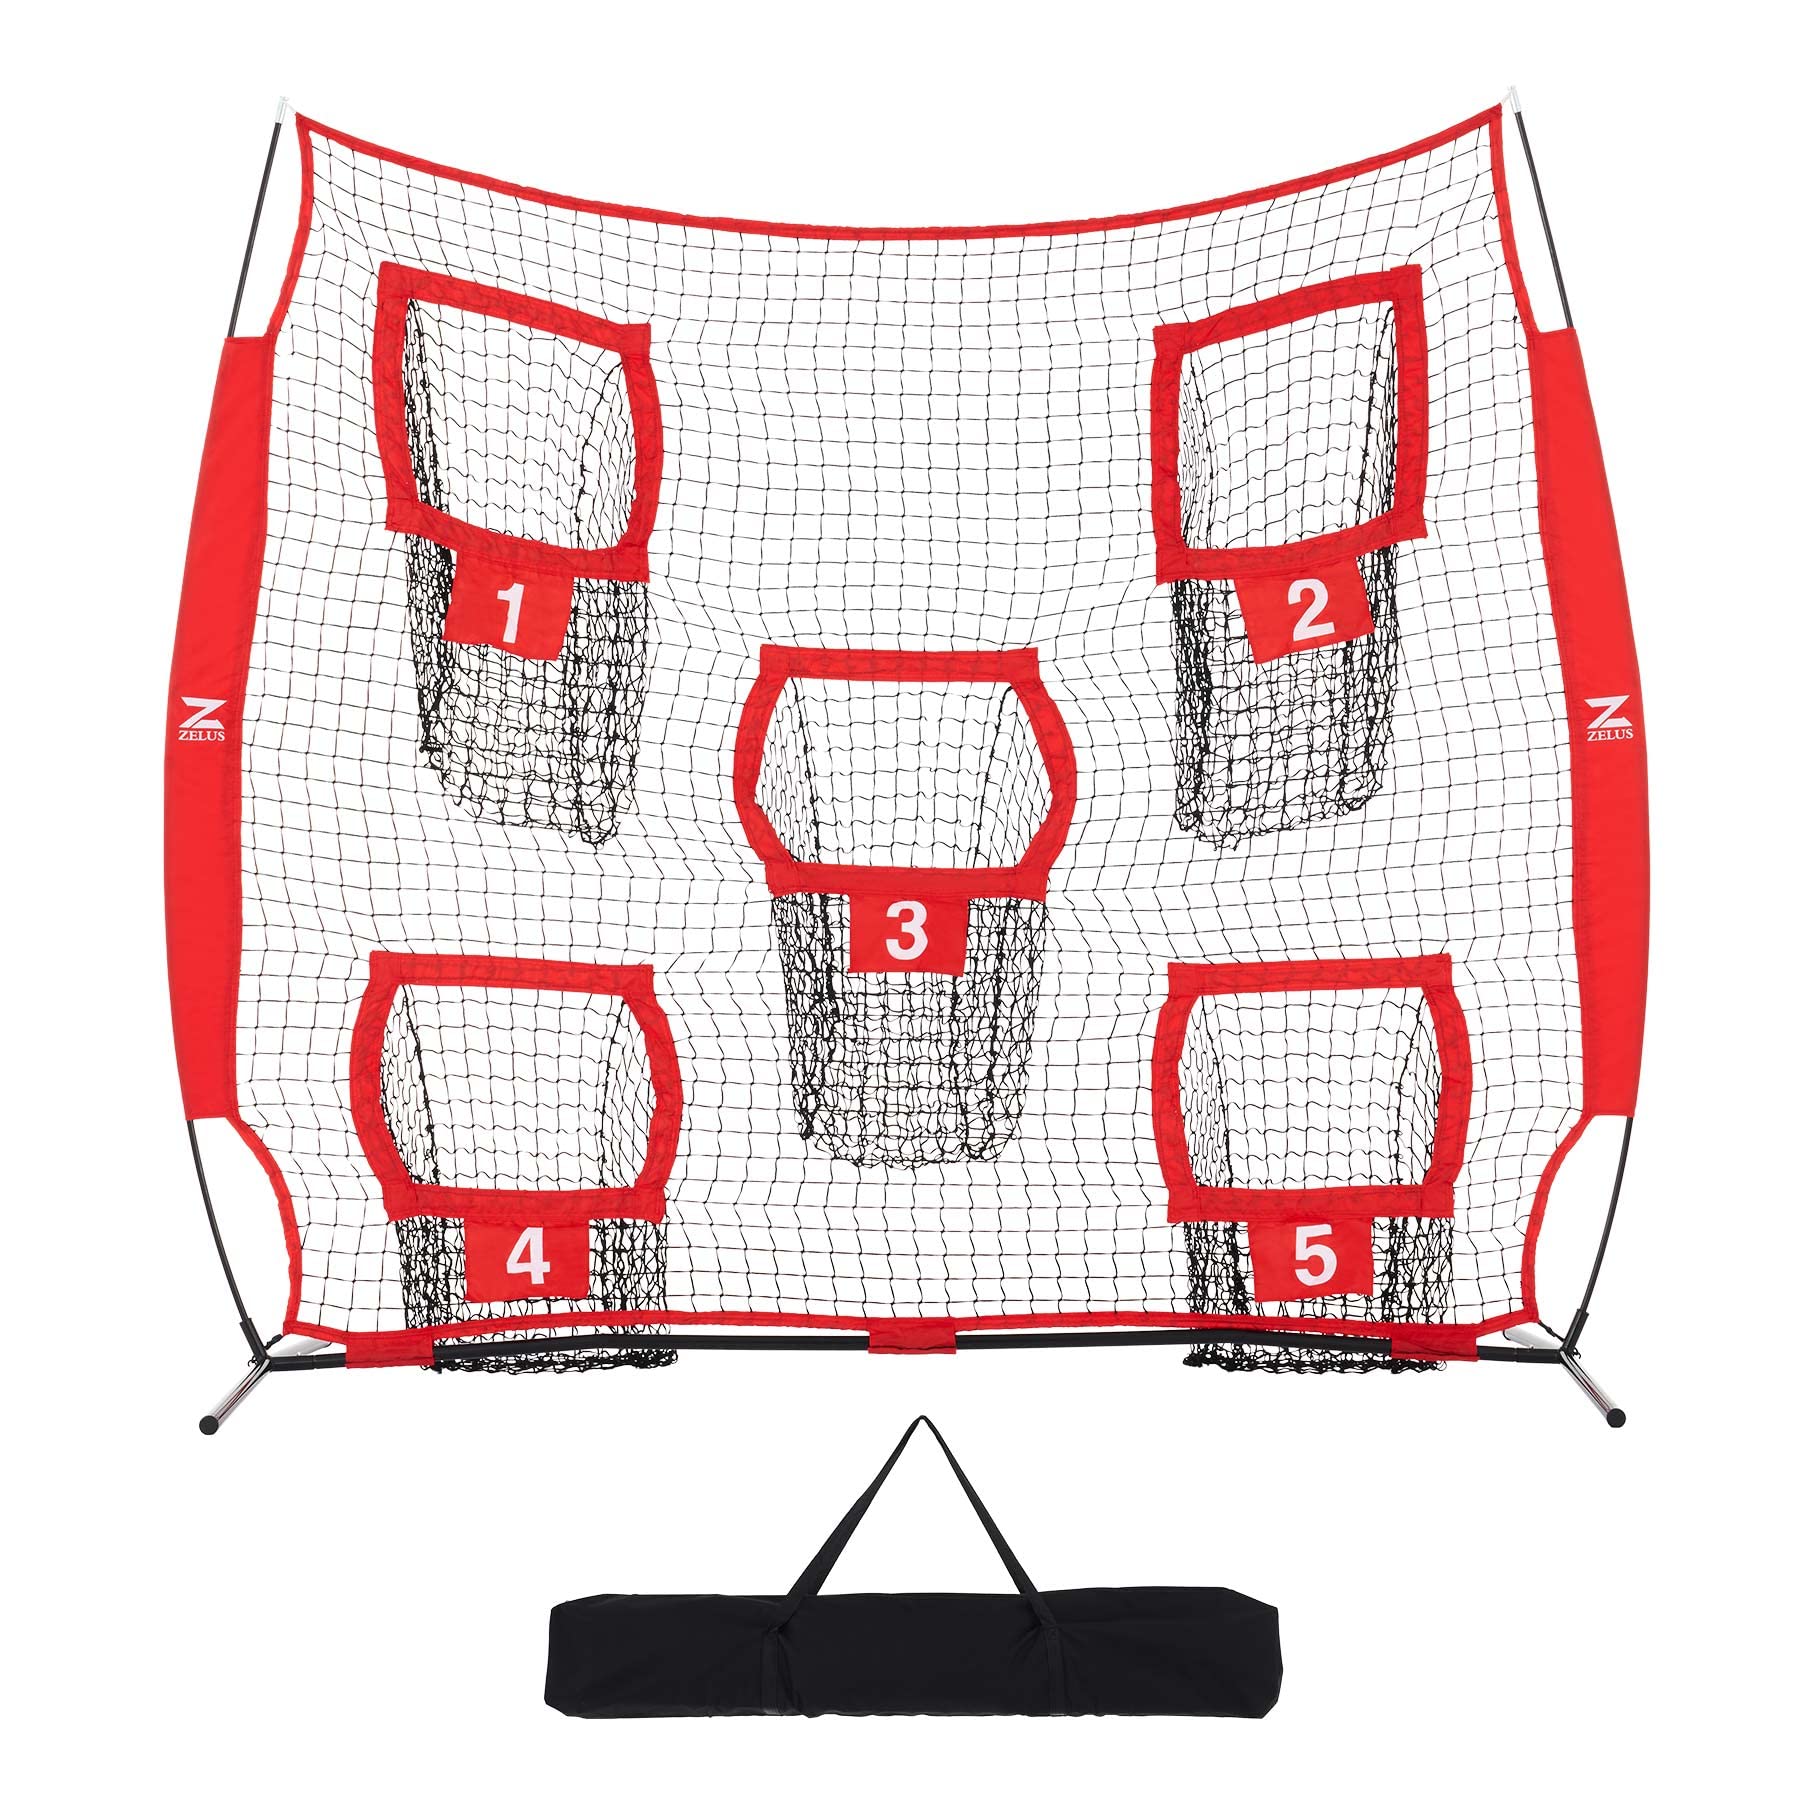 ZELUS 7 x 7ft Football Trainer Throwing Net | Training Throwing Target Practice with 5 Throwing Targets | Great for Quarterback | Includes Carry Bag